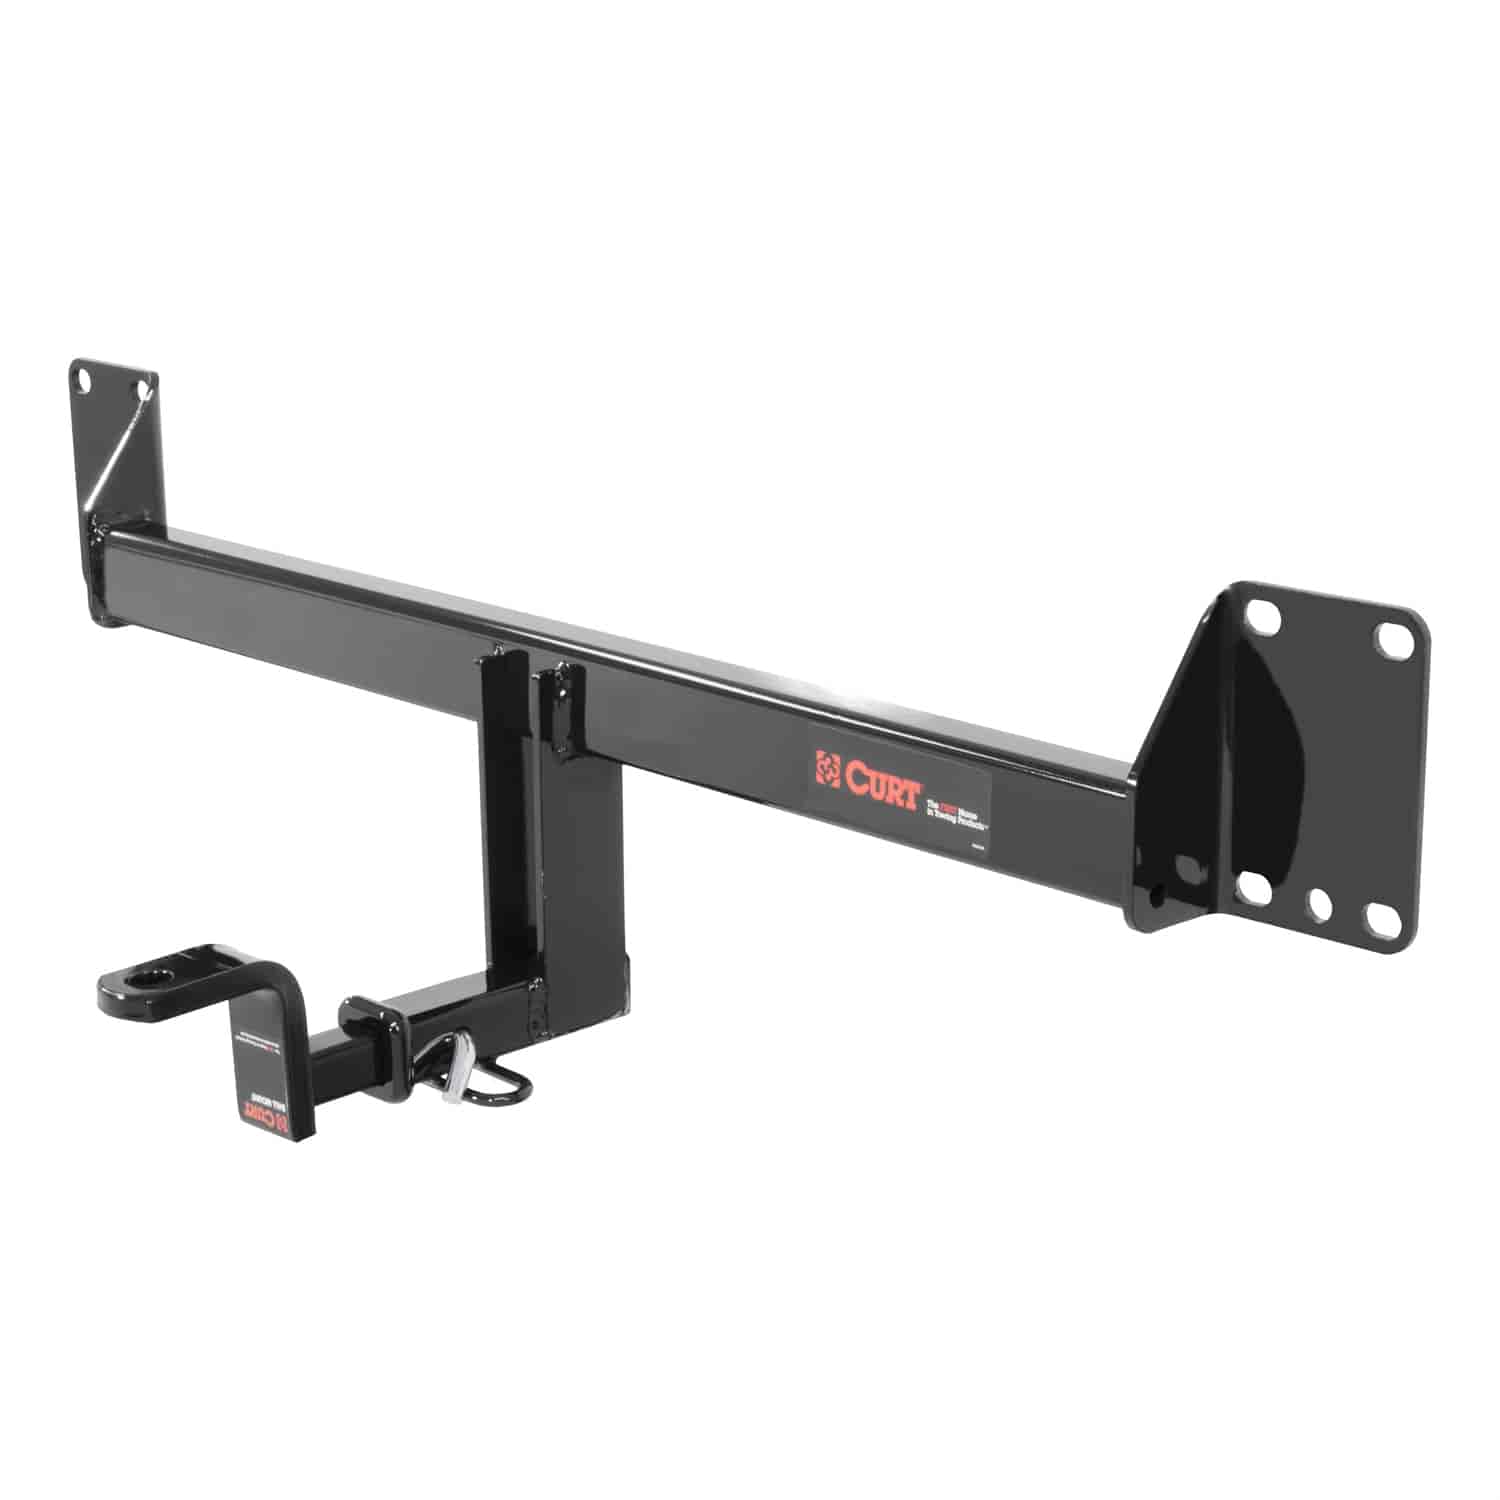 Class 2 Trailer Hitch with Ball Mount